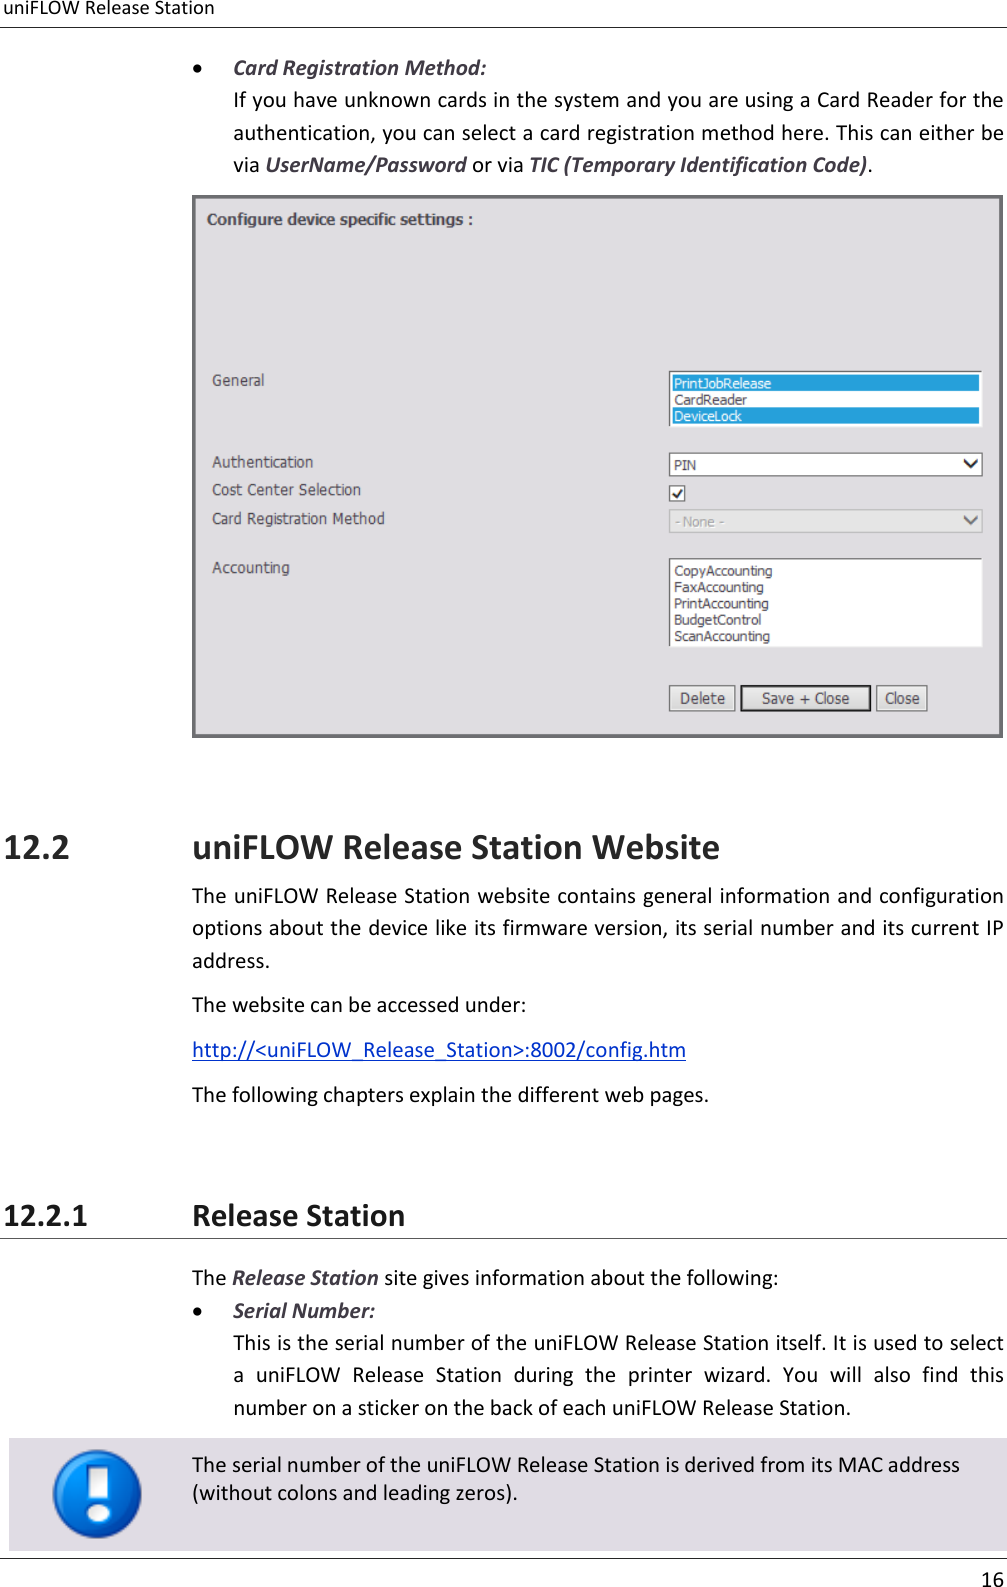 uniFLOW Release Station     16   Card Registration Method: If you have unknown cards in the system and you are using a Card Reader for the authentication, you can select a card registration method here. This can either be via UserName/Password or via TIC (Temporary Identification Code).   12.2 uniFLOW Release Station Website The uniFLOW Release Station website contains general information and configuration options about the device like its firmware version, its serial number and its current IP address. The website can be accessed under: http://&lt;uniFLOW_Release_Station&gt;:8002/config.htm The following chapters explain the different web pages.  12.2.1 Release Station The Release Station site gives information about the following:  Serial Number: This is the serial number of the uniFLOW Release Station itself. It is used to select a  uniFLOW  Release  Station  during  the  printer  wizard.  You  will  also  find  this number on a sticker on the back of each uniFLOW Release Station.   The serial number of the uniFLOW Release Station is derived from its MAC address (without colons and leading zeros). 